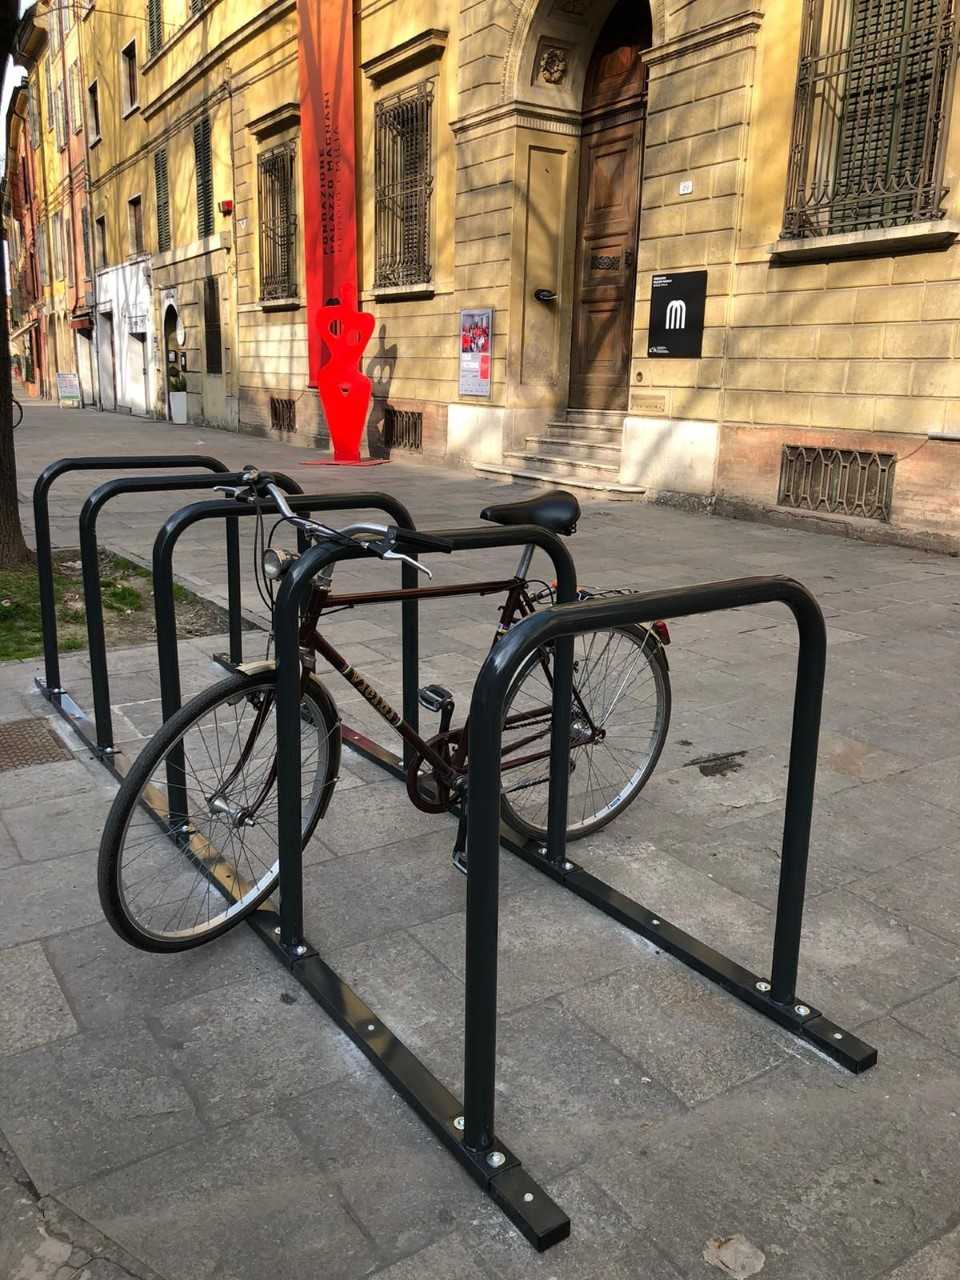 Rastrelliera per Biciclette - City | IsaProject